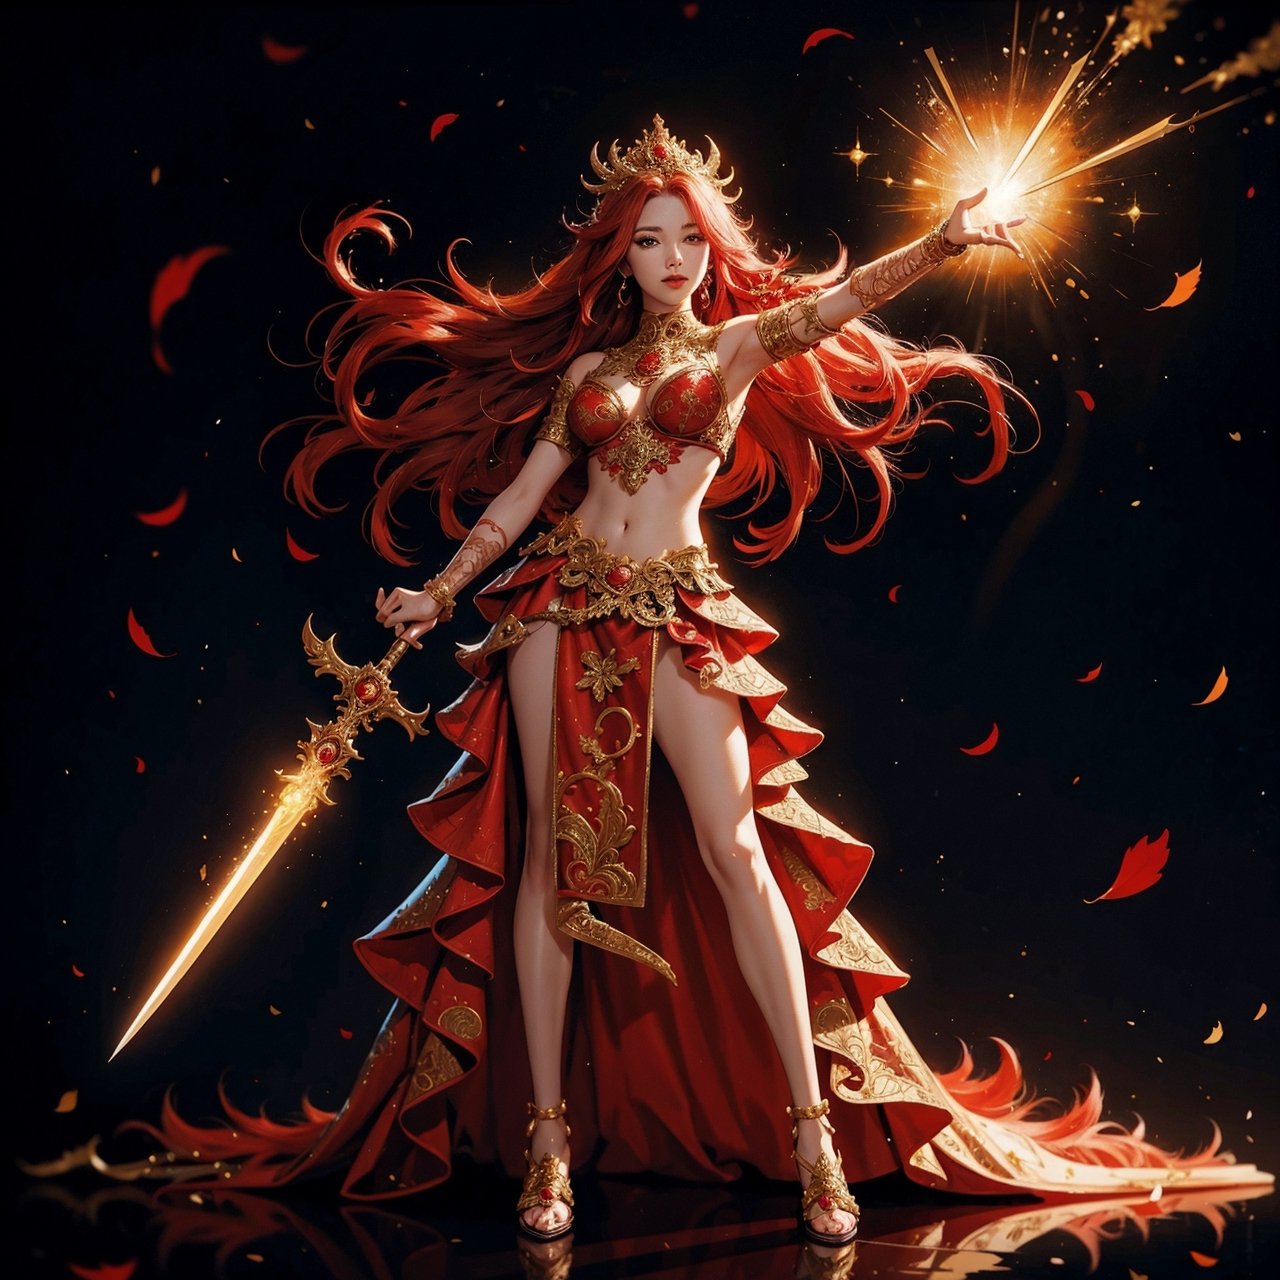 Full body image, 2.5D drawing, sexy 18 year old girl in fire goddess costume, fiery red hair with flower decoration, Pantone costume, magic valley, gold and red magic sword, light show, (Visual Arts, Abstract: 1.2) ,Fantasy,(Realism: 1.3),(Intricate Detail: 1.5),Shallow Depth of Field,Bokeh,Digital Illustration,Fantasy,AgoonGirl,1 Girl,